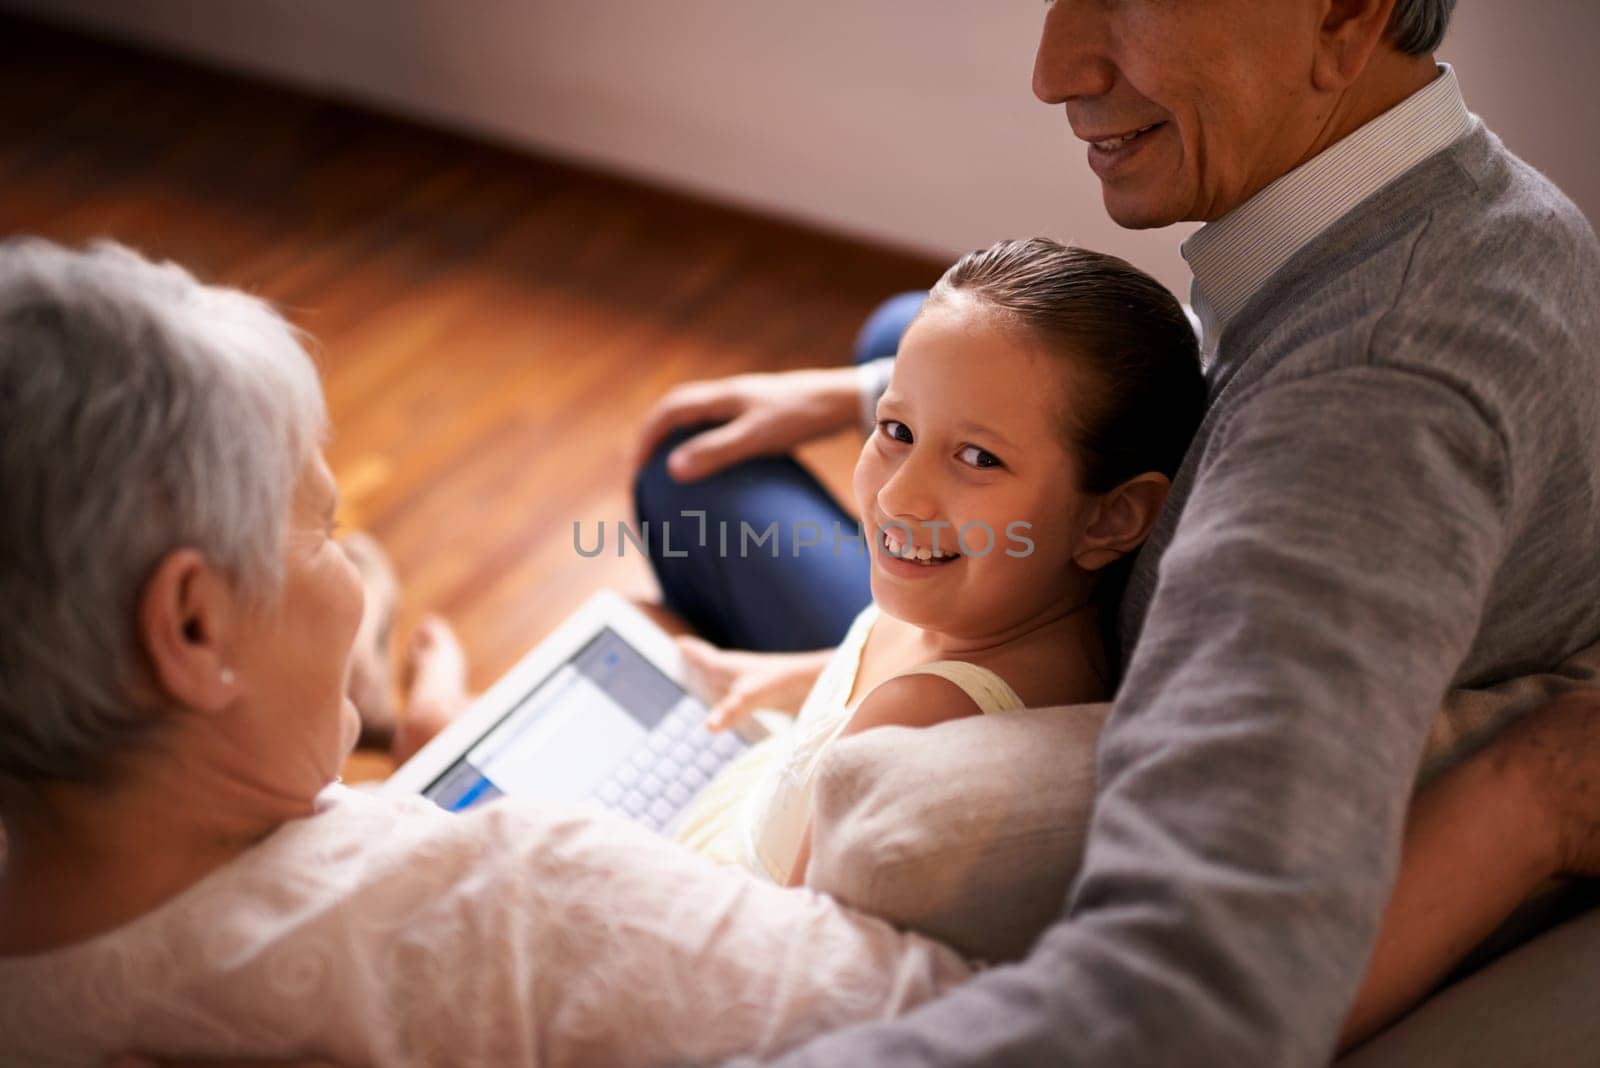 Child, grandparents and tablet on couch in home or online game or communication, teaching or connection. Elderly couple, retirement and girl or internet learning in apartment, development or bonding.